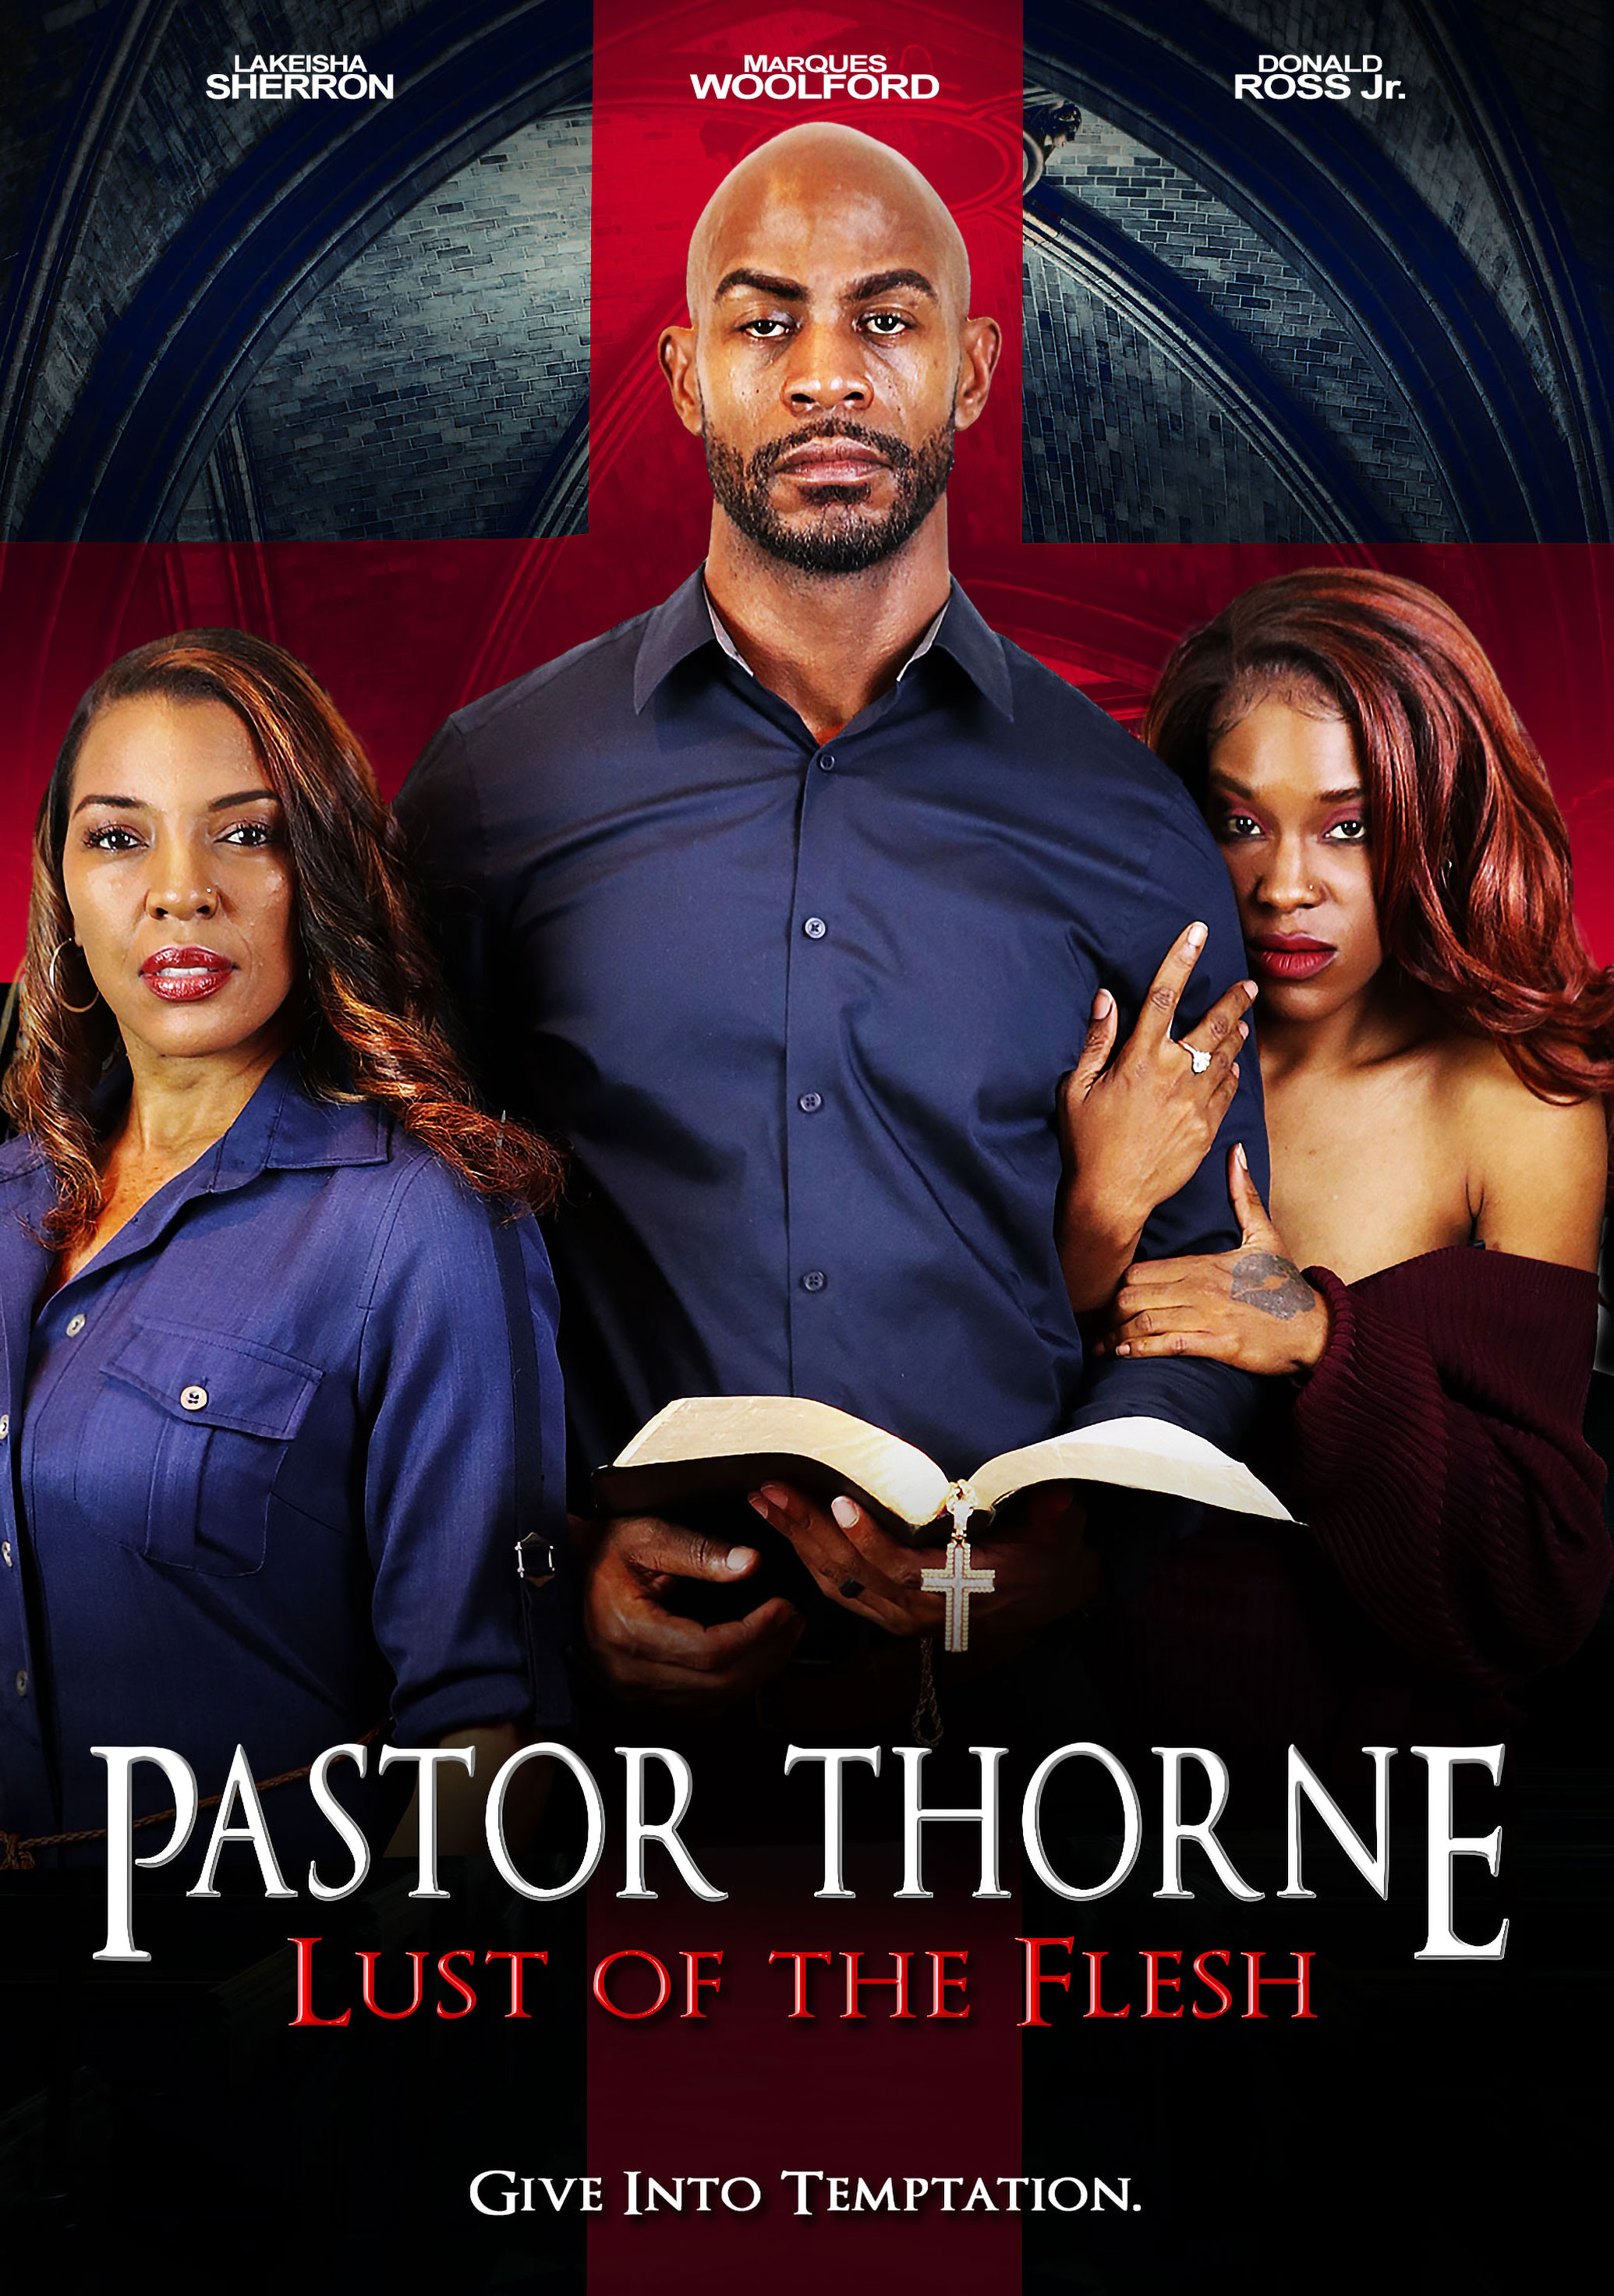 Pastor Thorne Lust of the Flesh (2021) Drama, Directed By Karlton T image picture